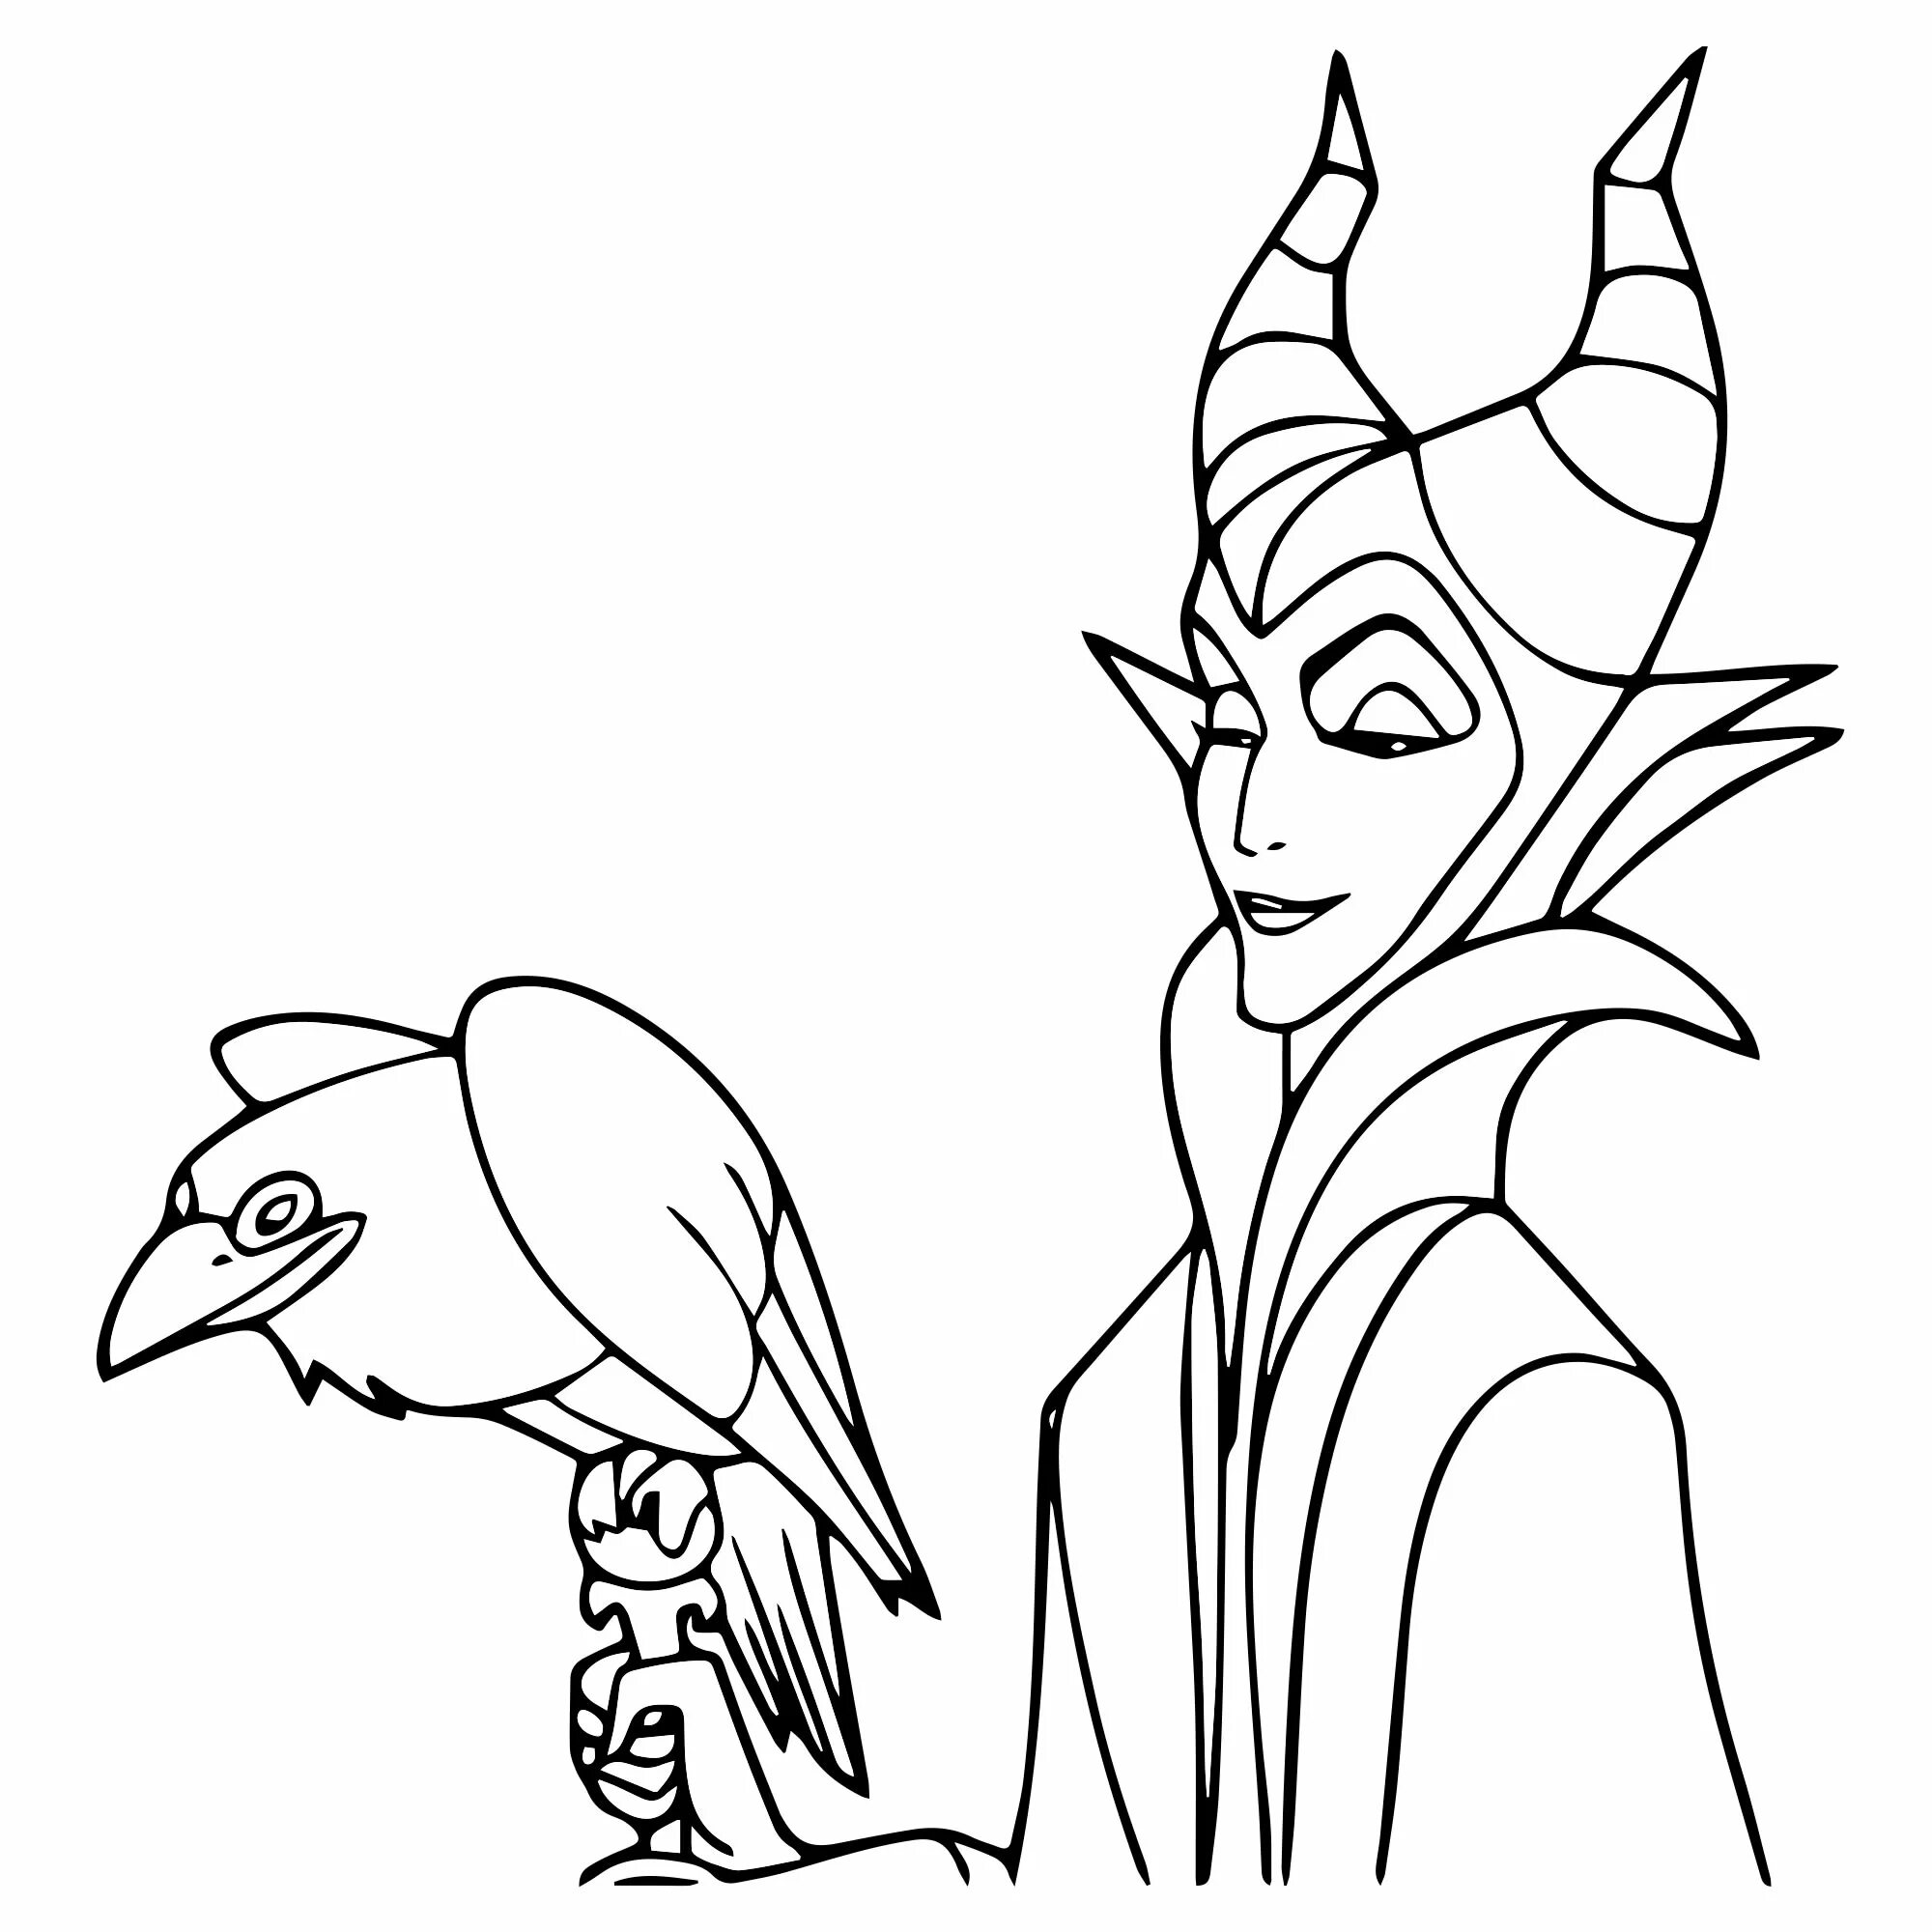 Maleficent for kids #2